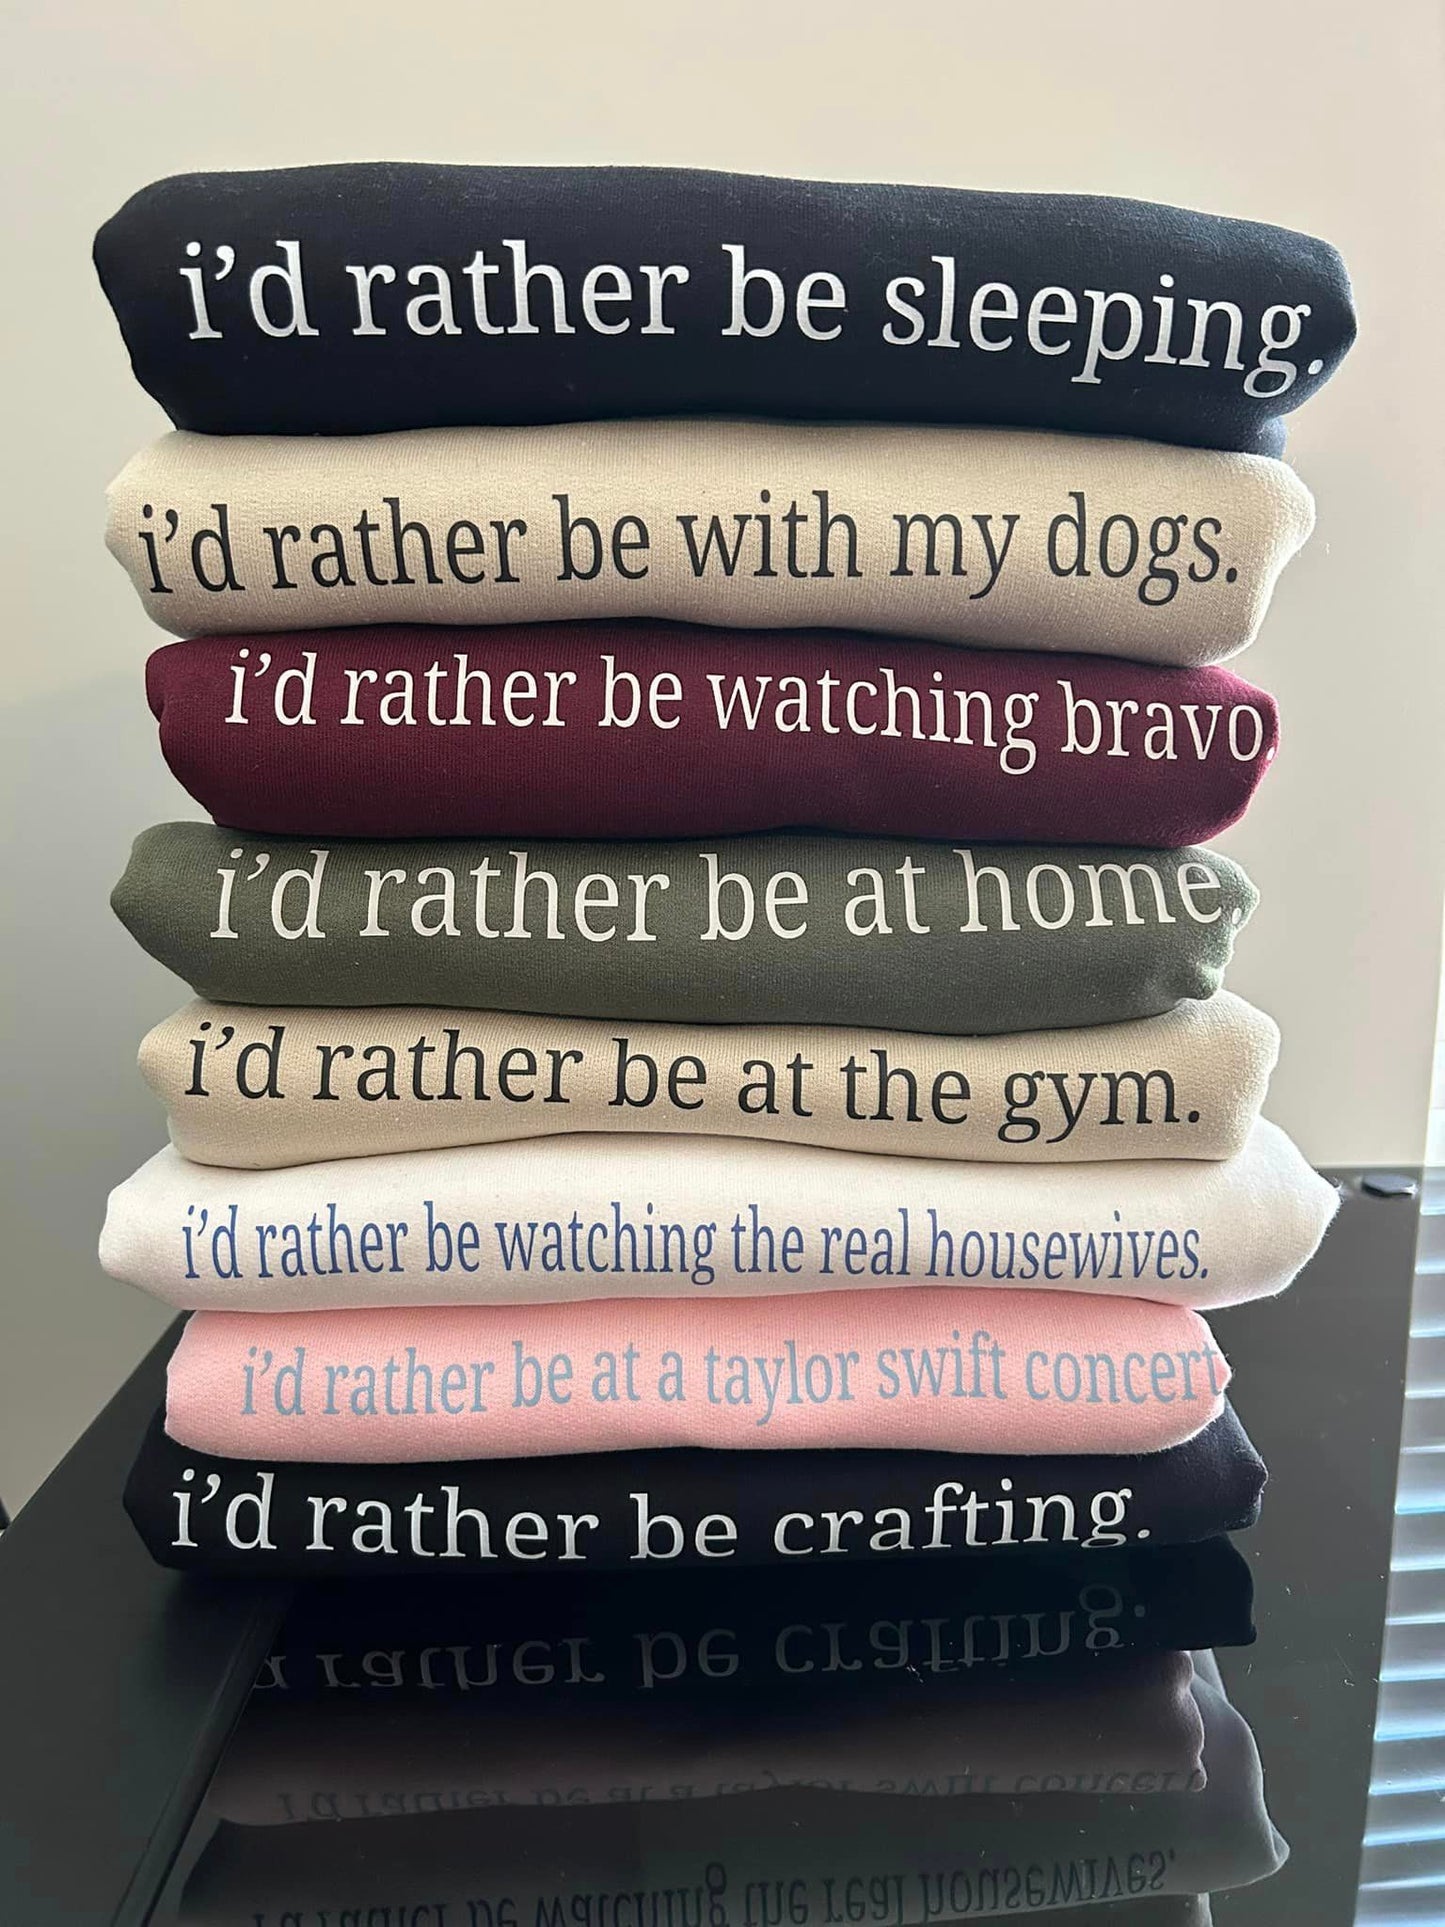 i'd rather be with my dogs T-SHIRT OR PICK FROM 200 COLOR & STYLE OPTIONS! - TAT 4-7 DAYS